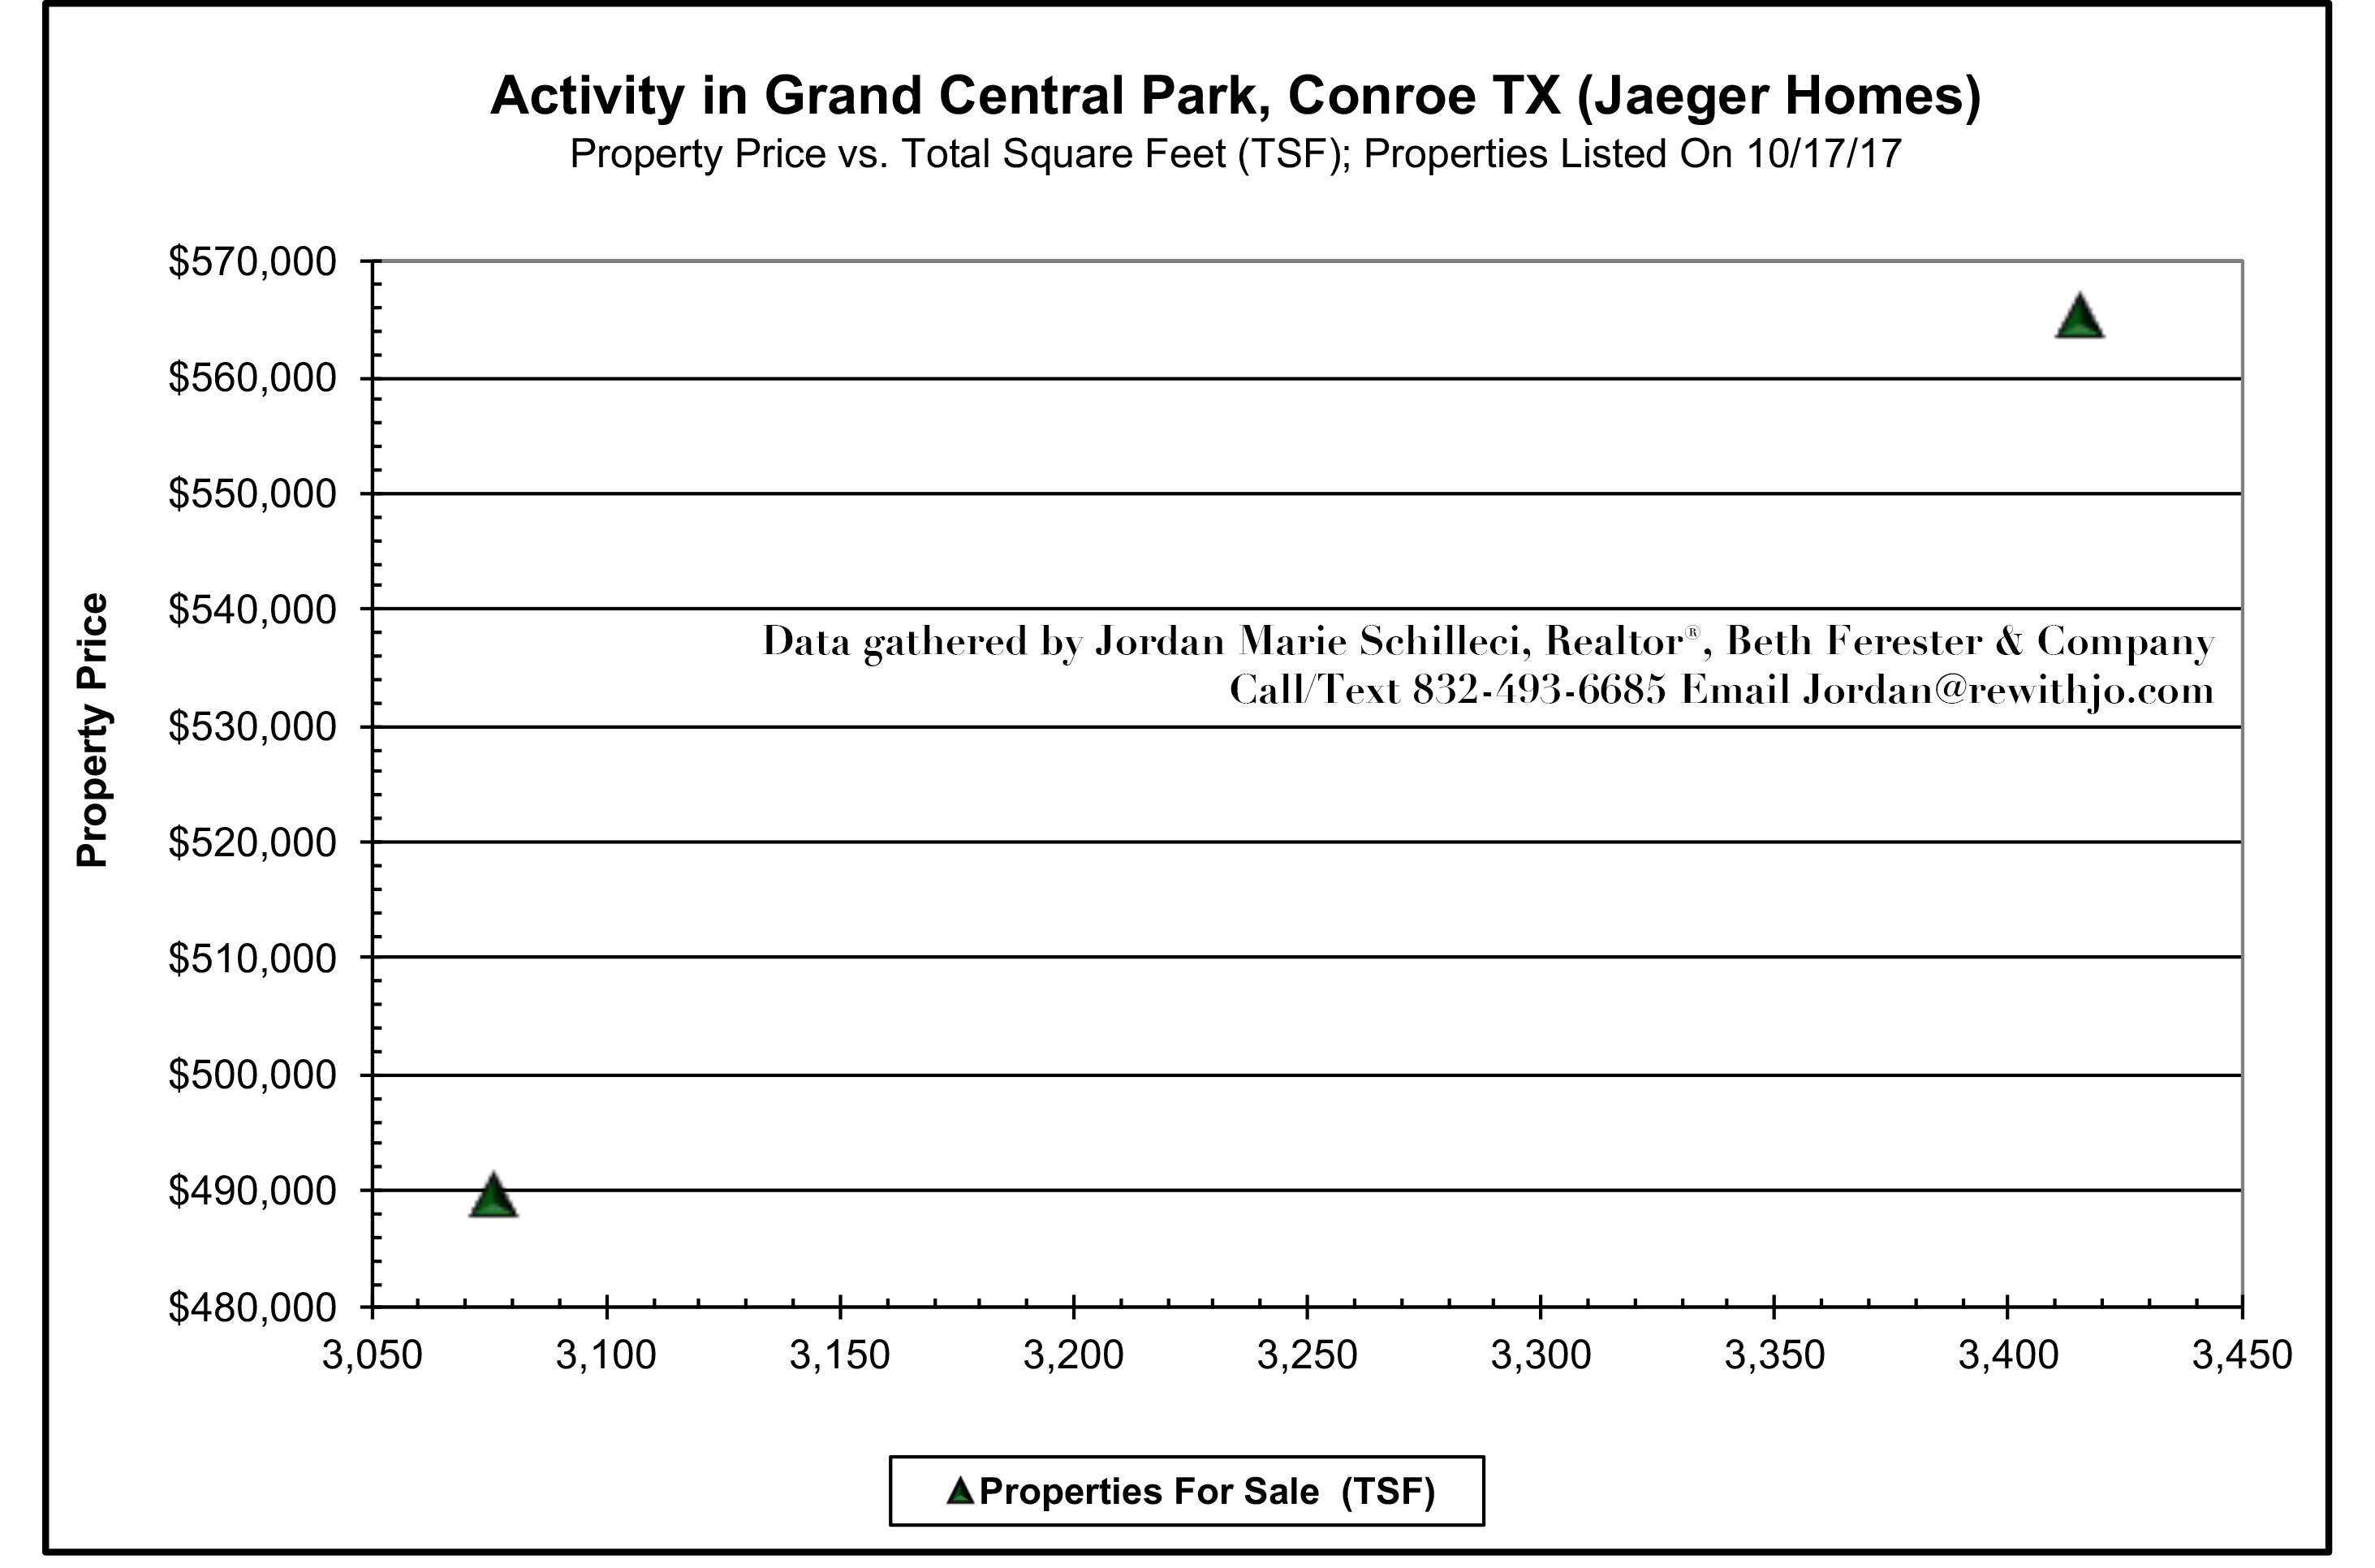 Jaeger Homes For Sale in Grand Central Park Mid-October 2017